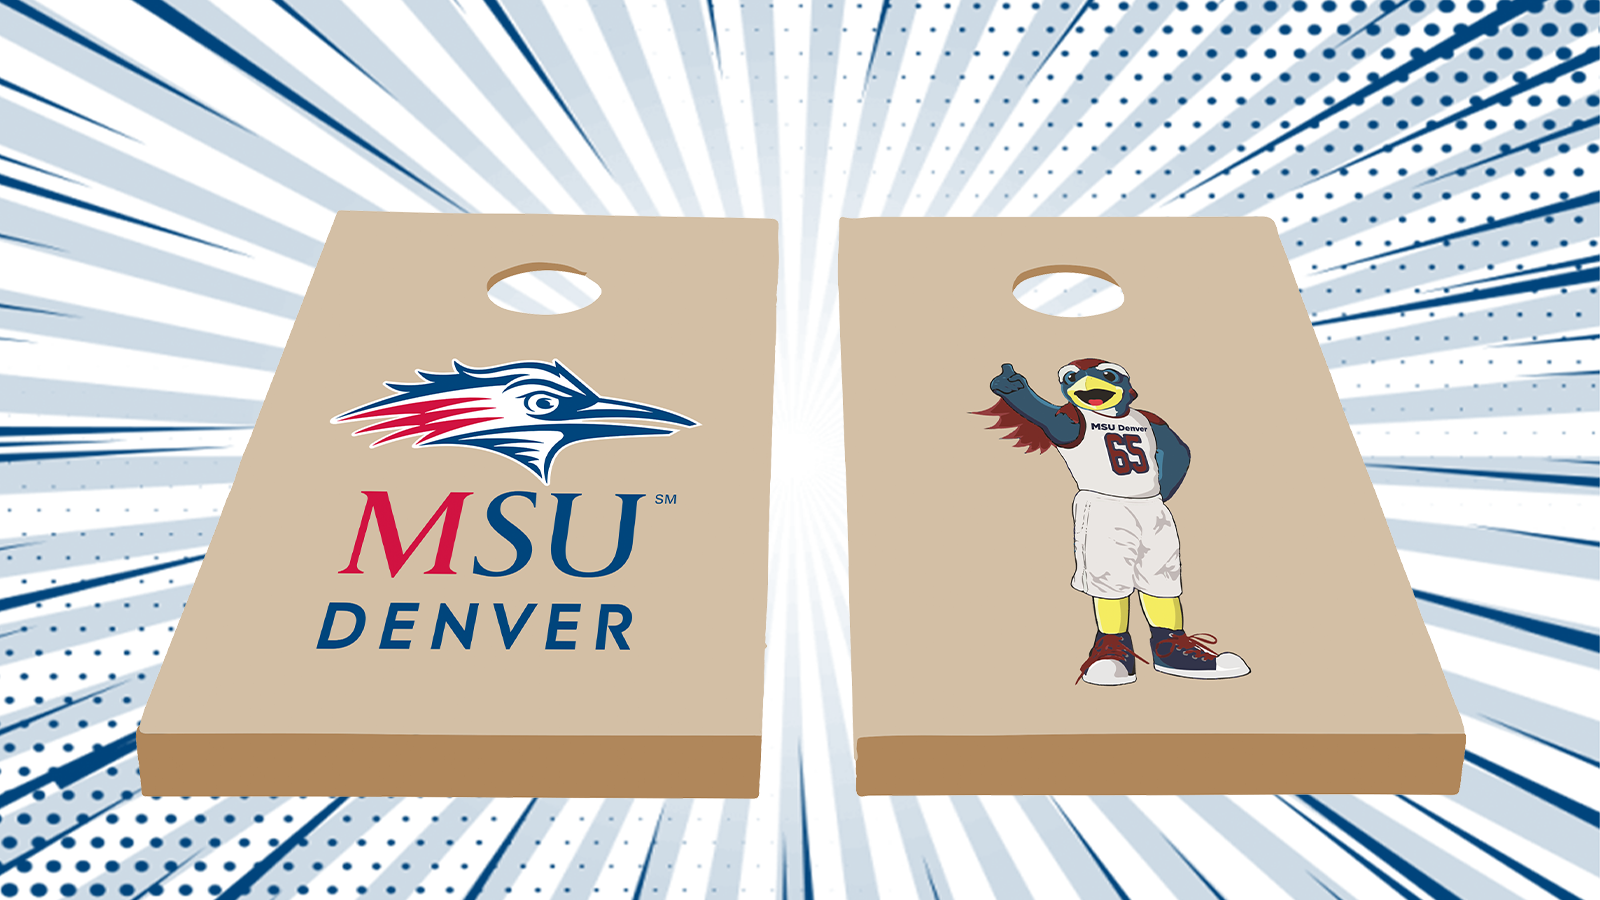 Two cornhole boards, one with an MSU Denver logo and the other with an image of Rowdy